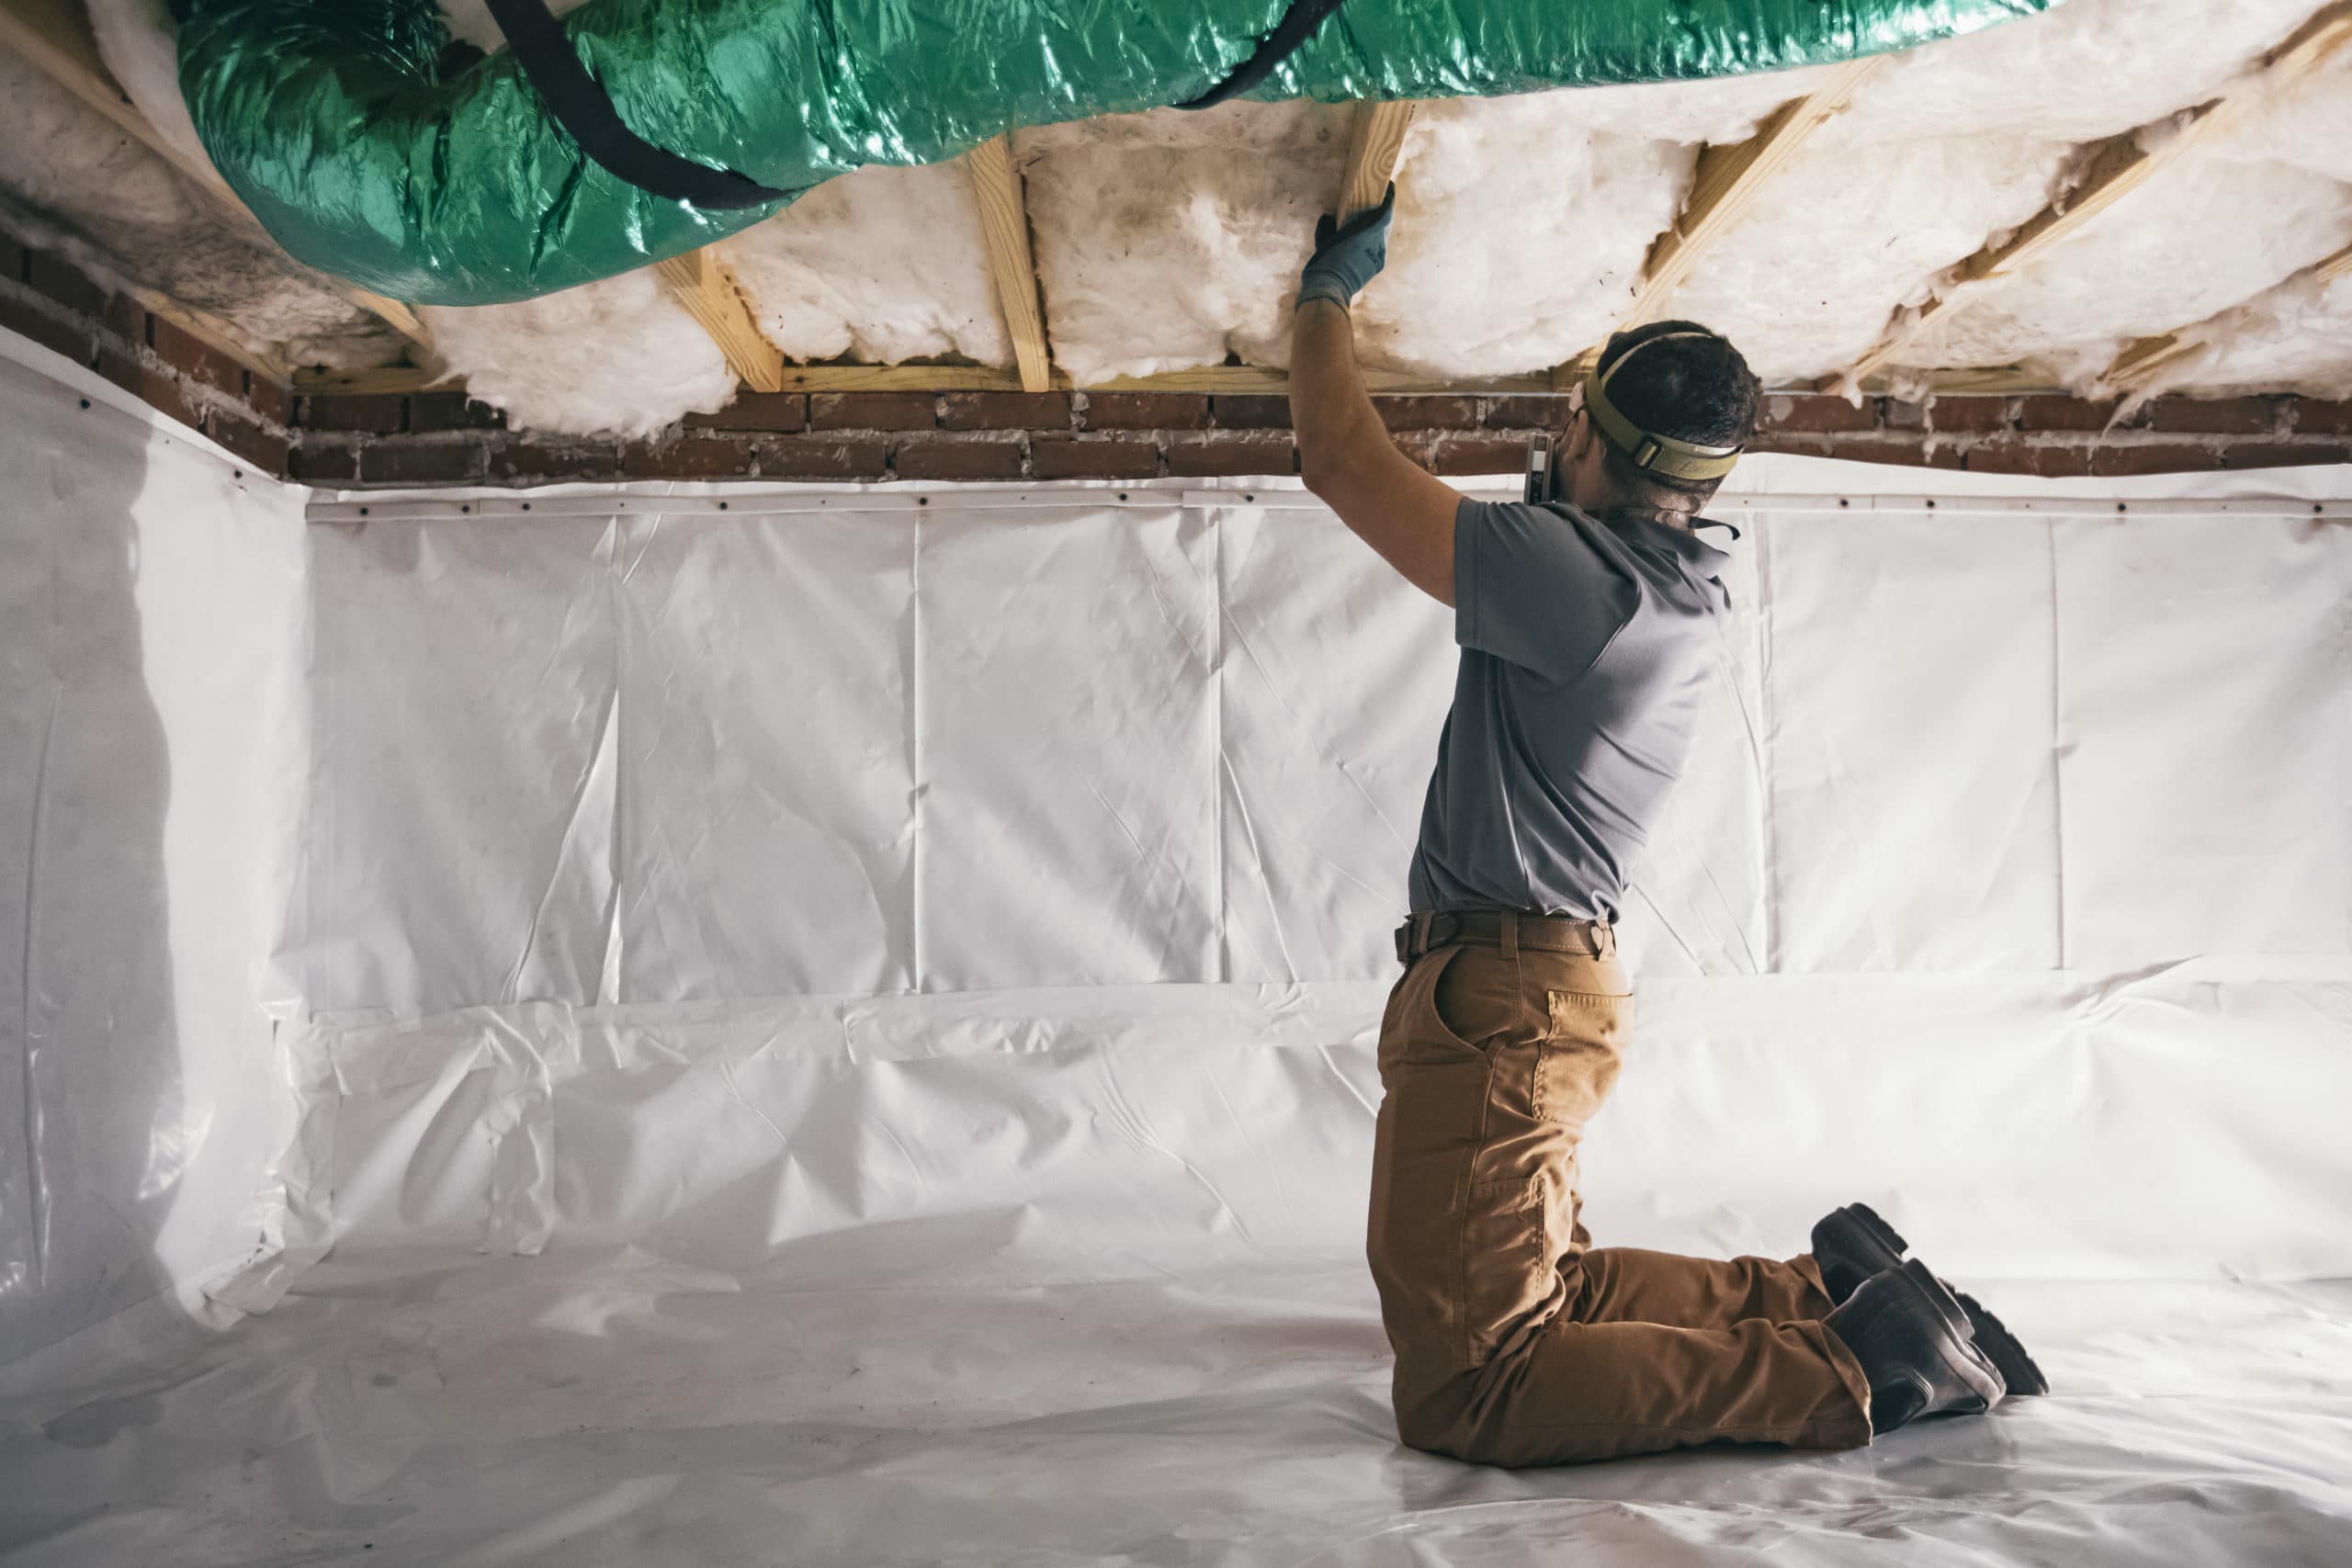 How To Install Insulation In A Crawl Space